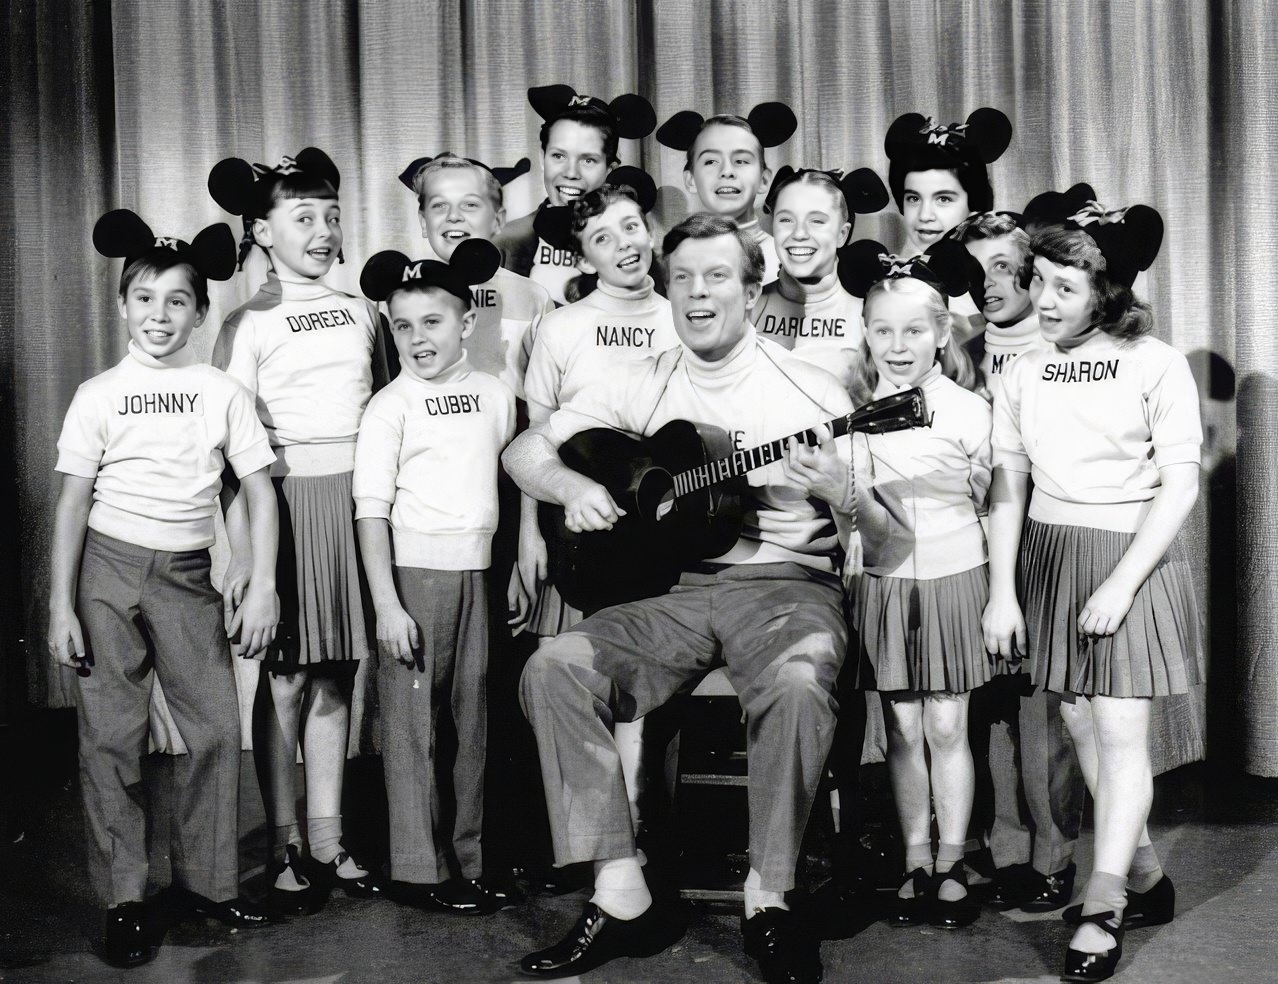 The Mickey Mouse Club Mousketeers of the 1950s: Icons of a Generation